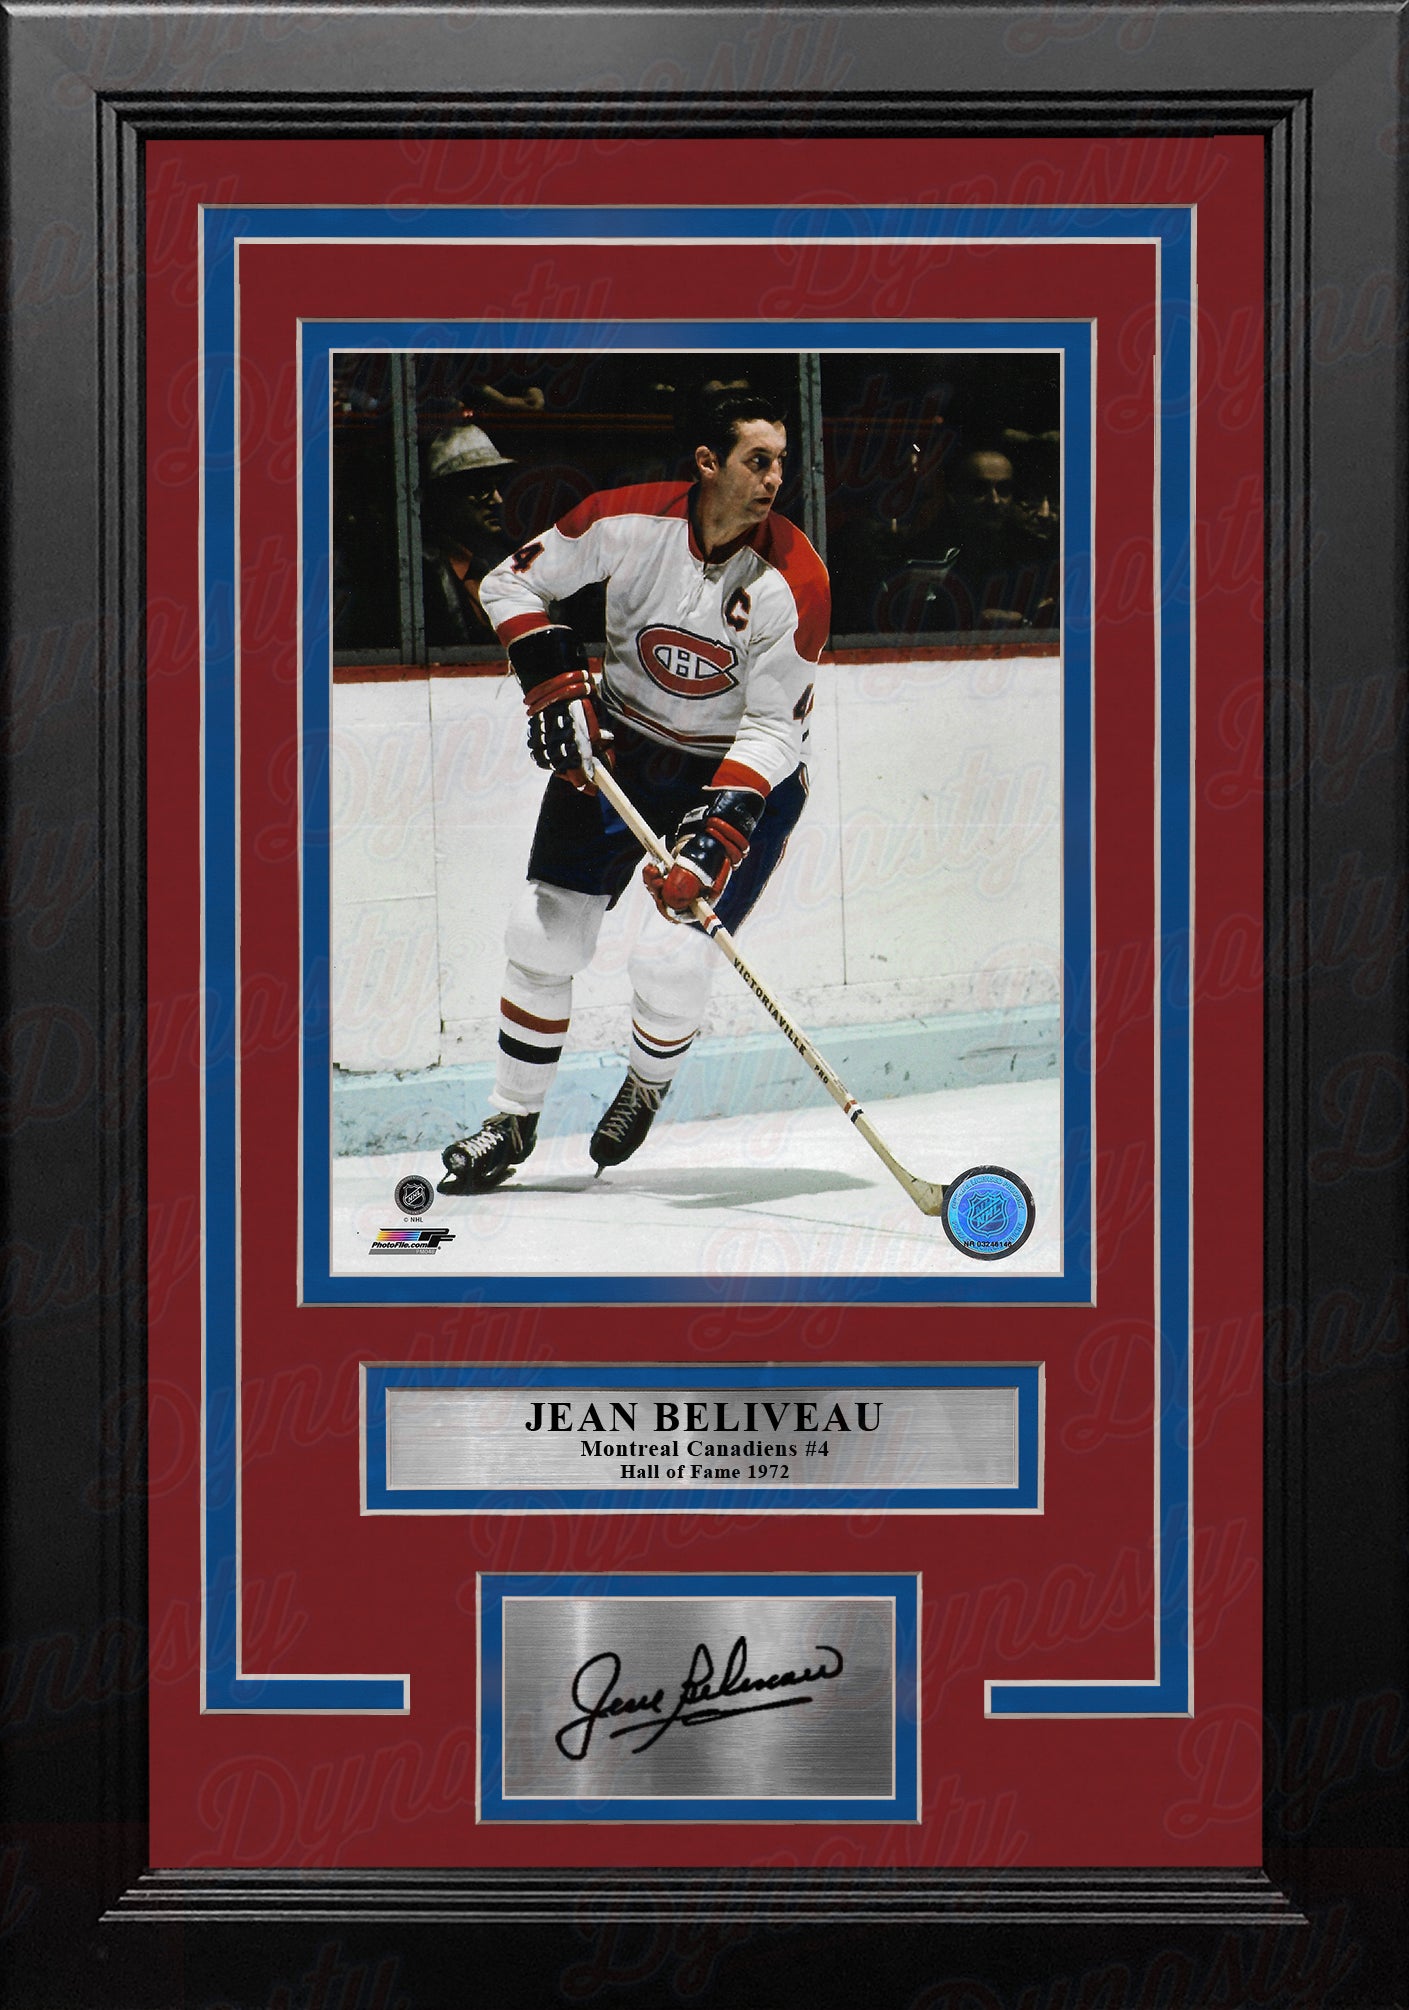 Jean Beliveau in Action Montreal Canadiens 8" x 10" Framed Hockey Photo with Engraved Autograph - Dynasty Sports & Framing 